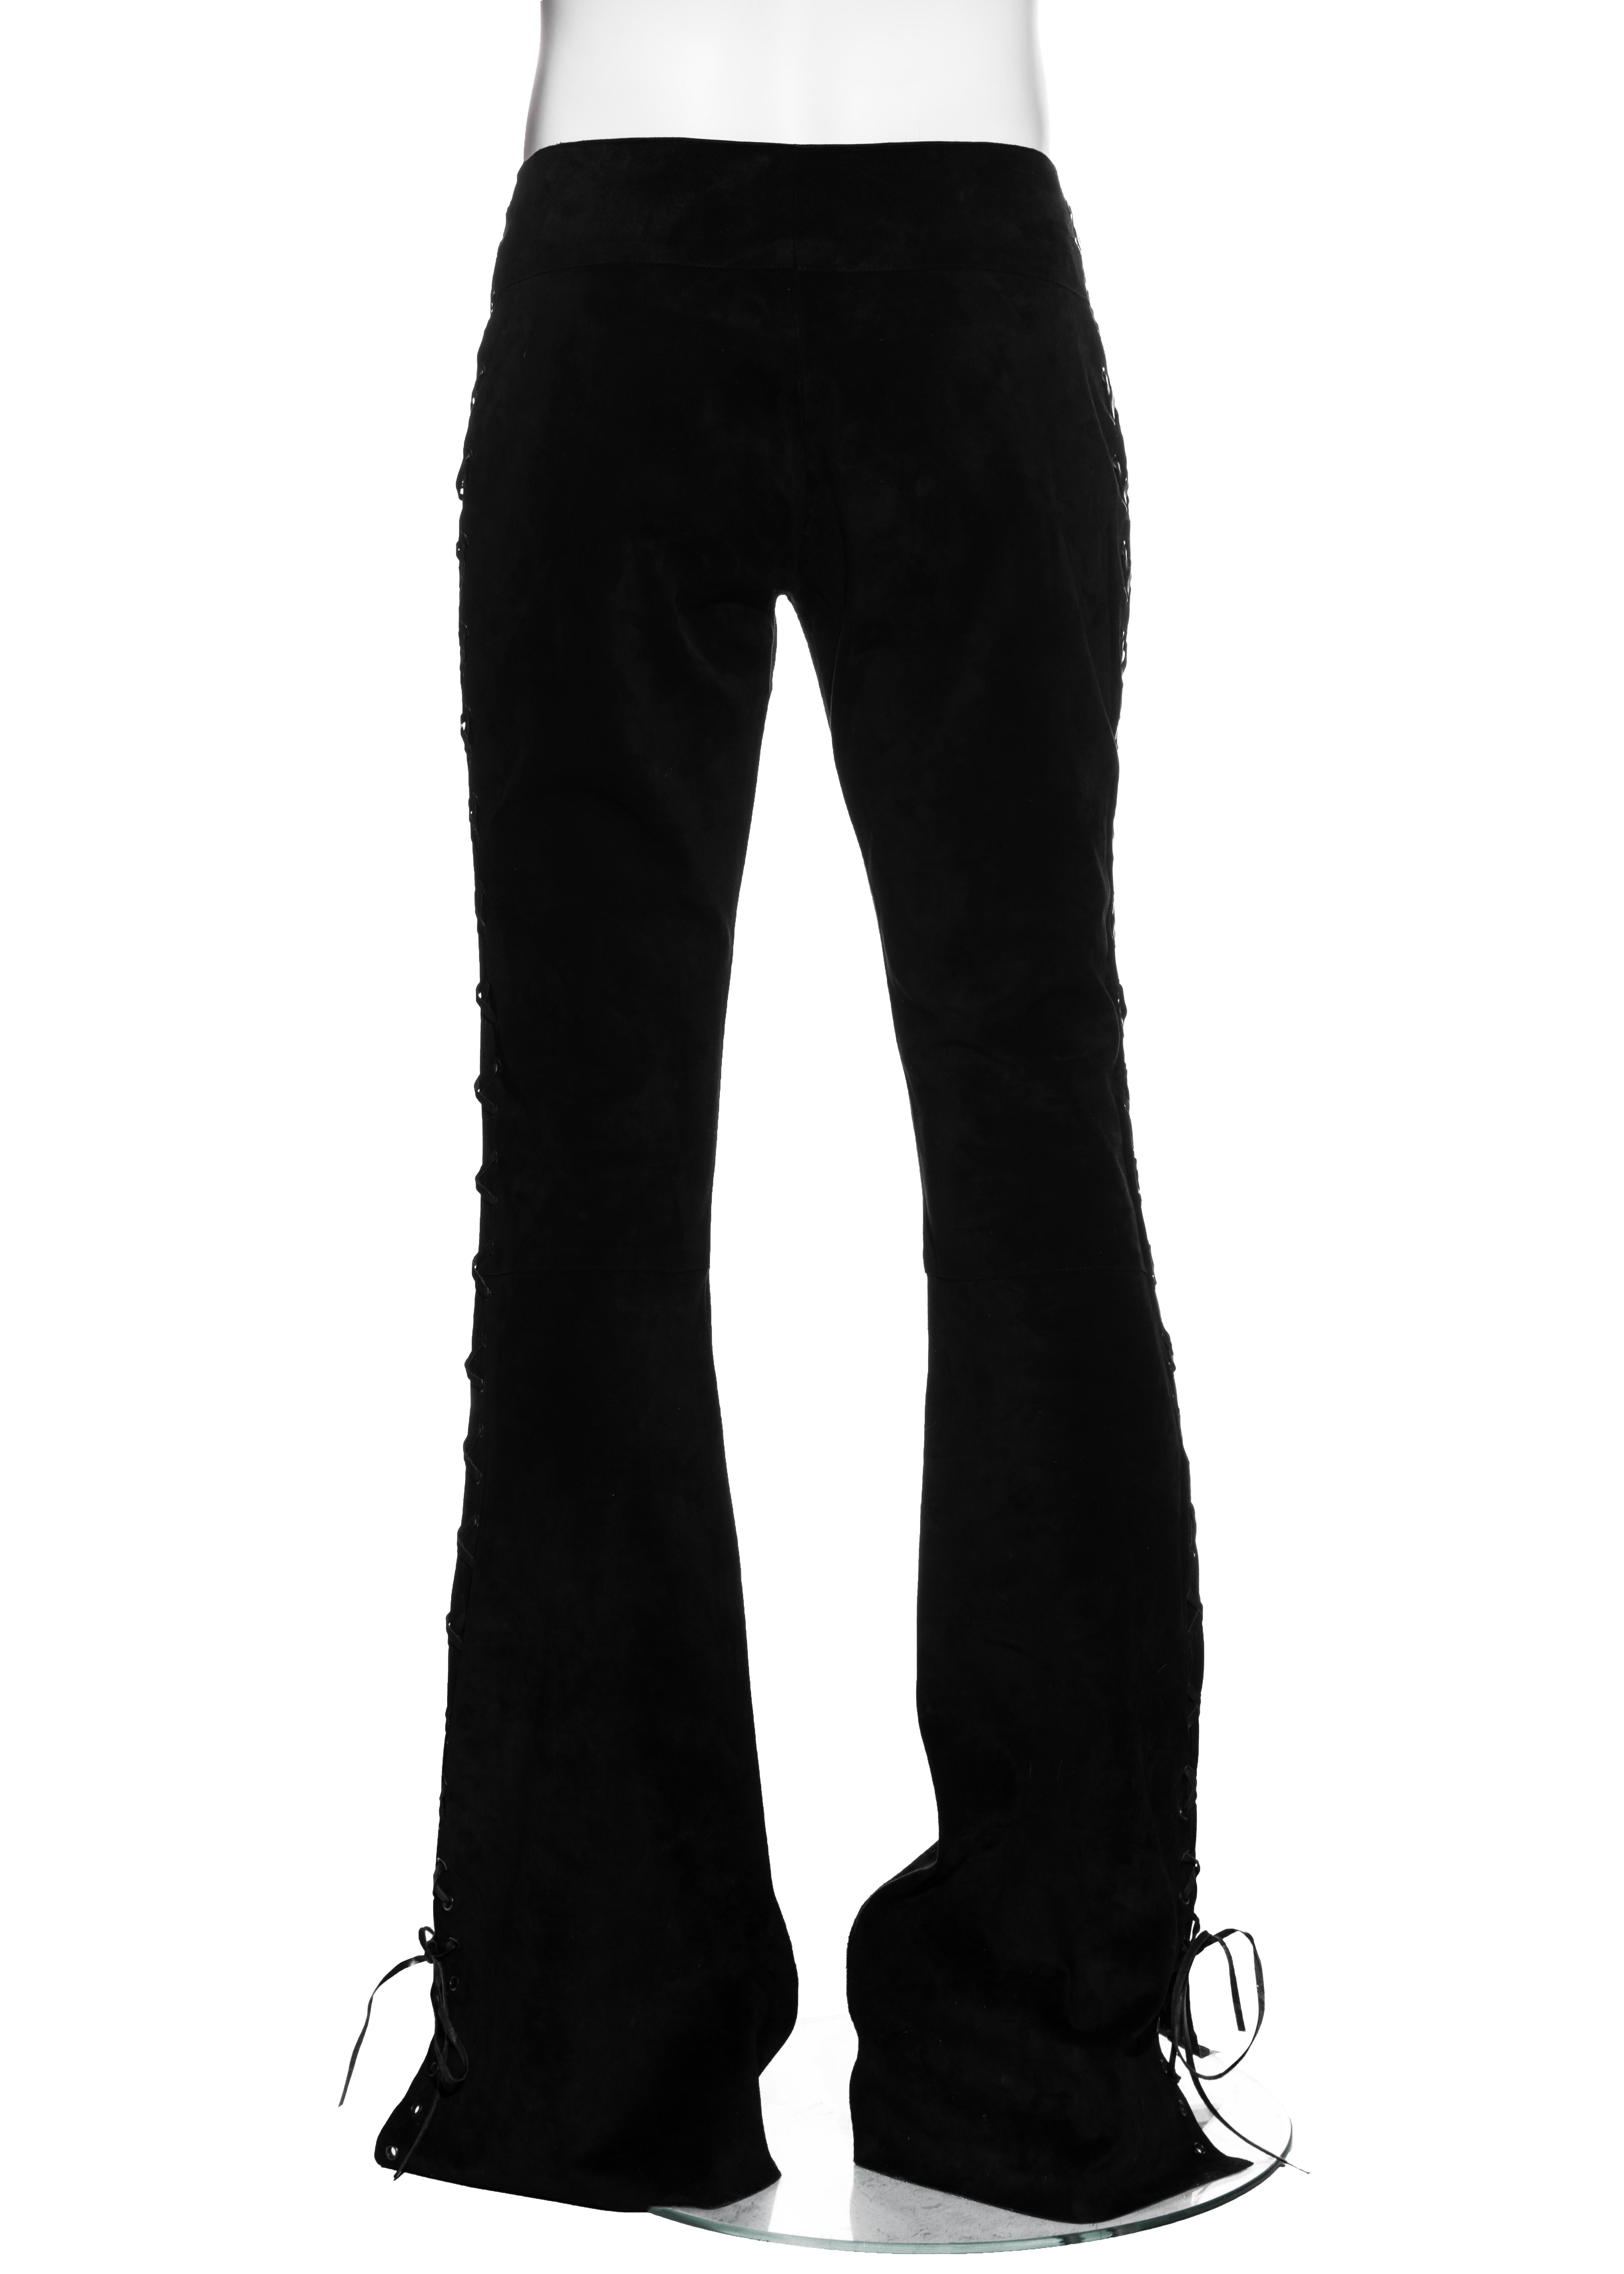 Gucci by Tom Ford men's leather and suede lace up flared pants, ss 2004 1